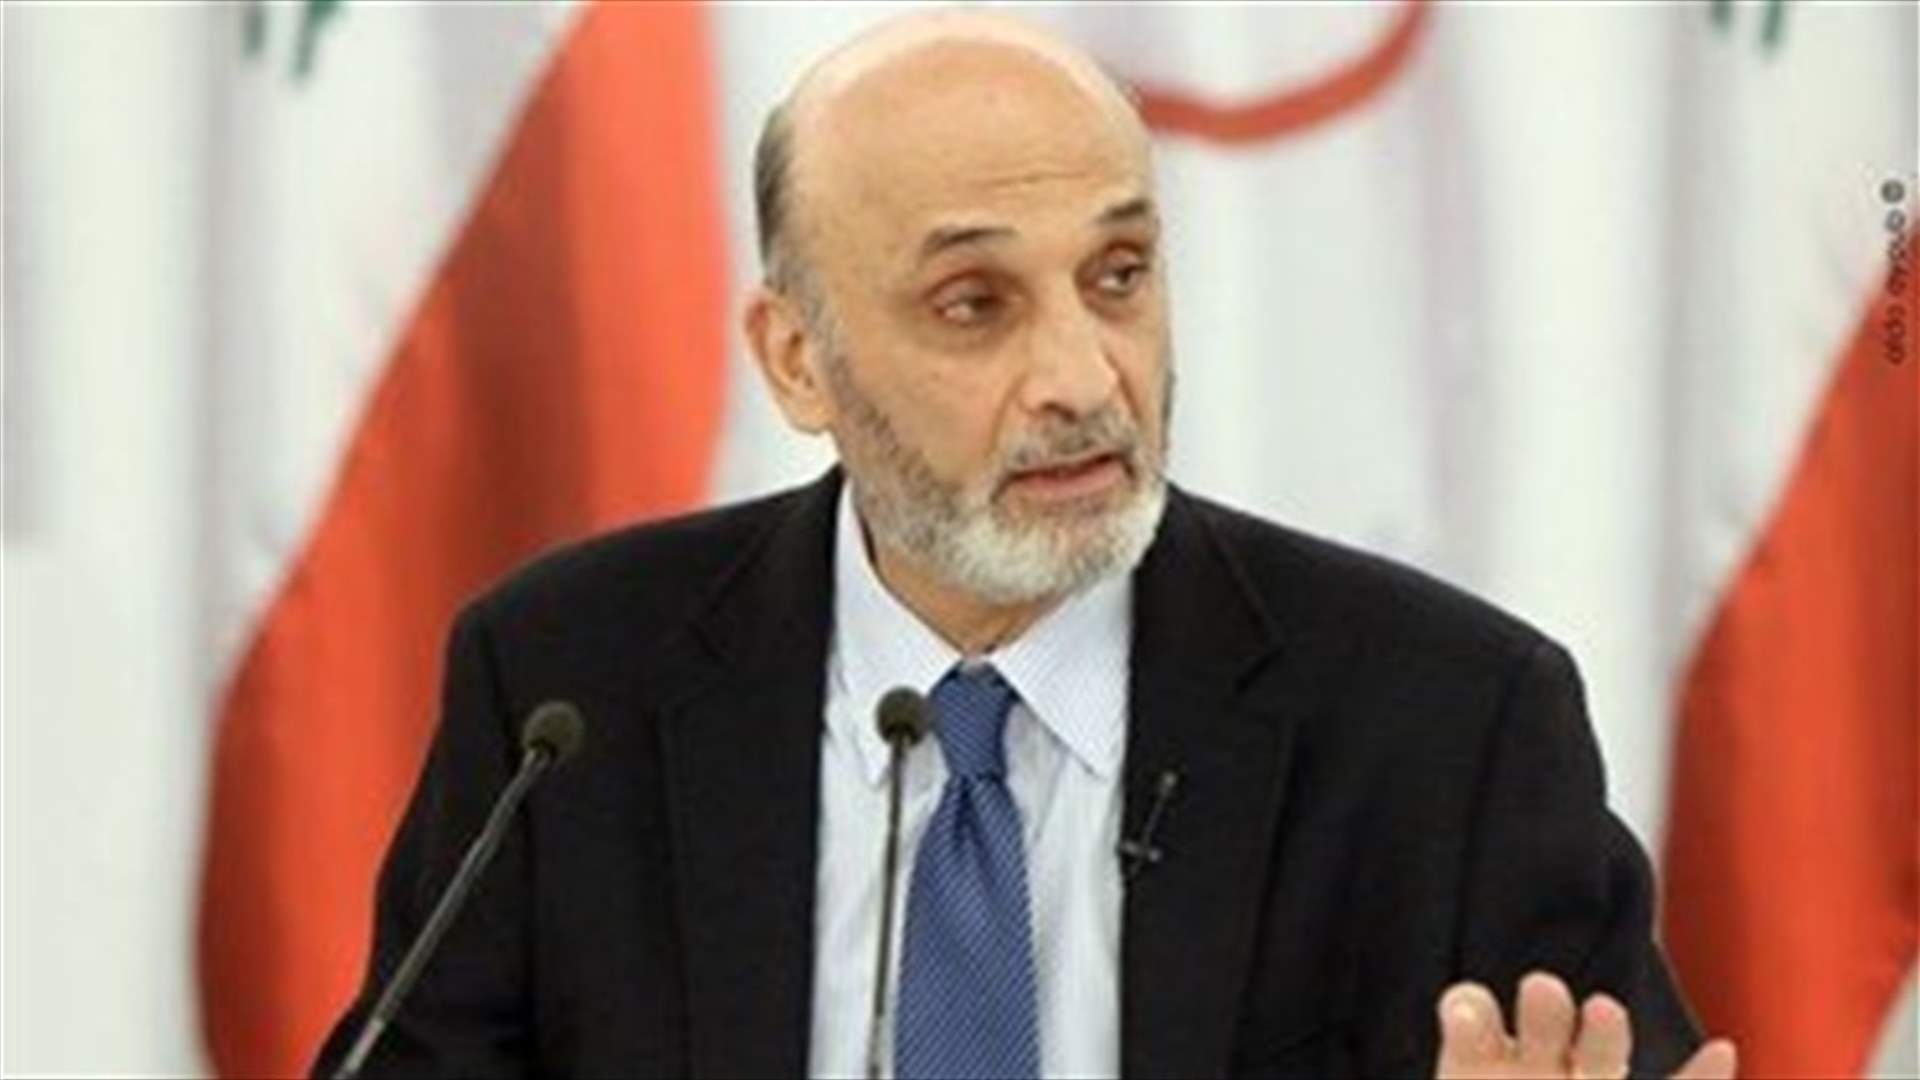 Geagea to Reuters: Lebanon has scant chance of getting IMF aid, opposition figure says